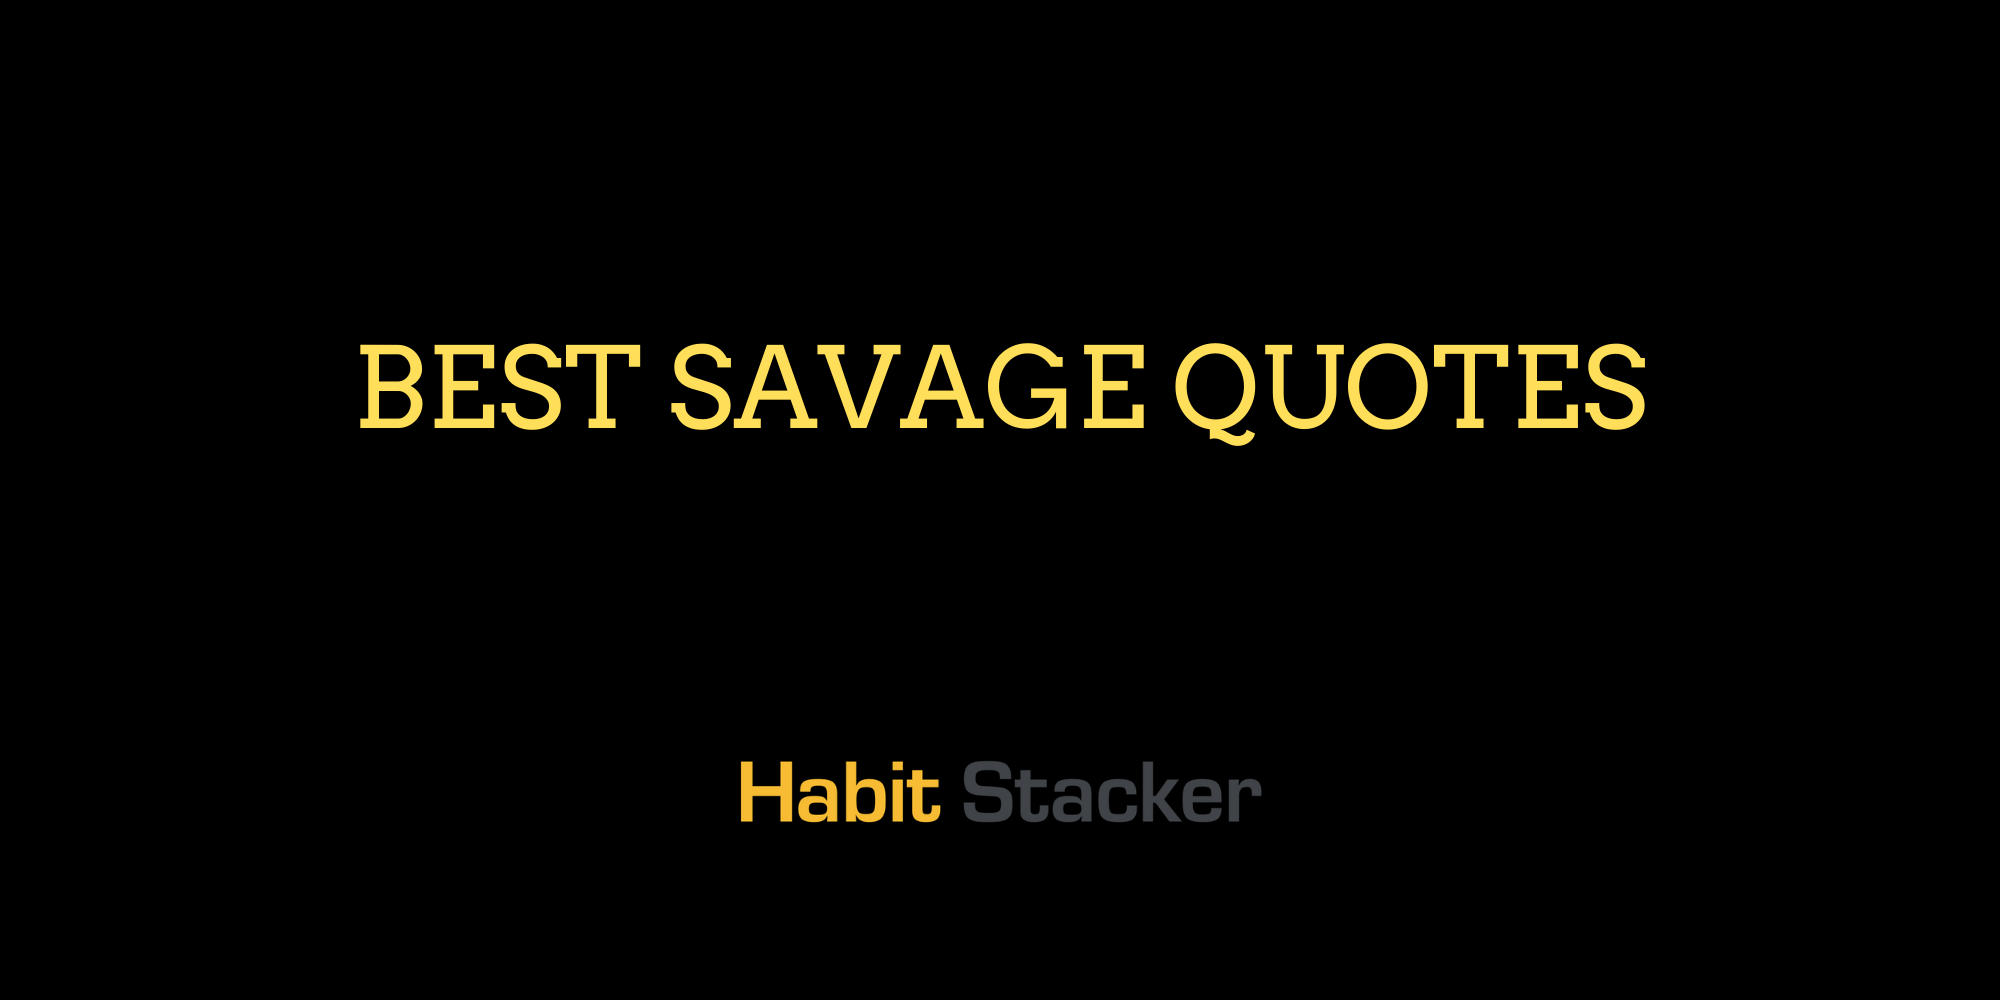 42 Best Savage Quotes For a Winners Mindset - Habit Stacker